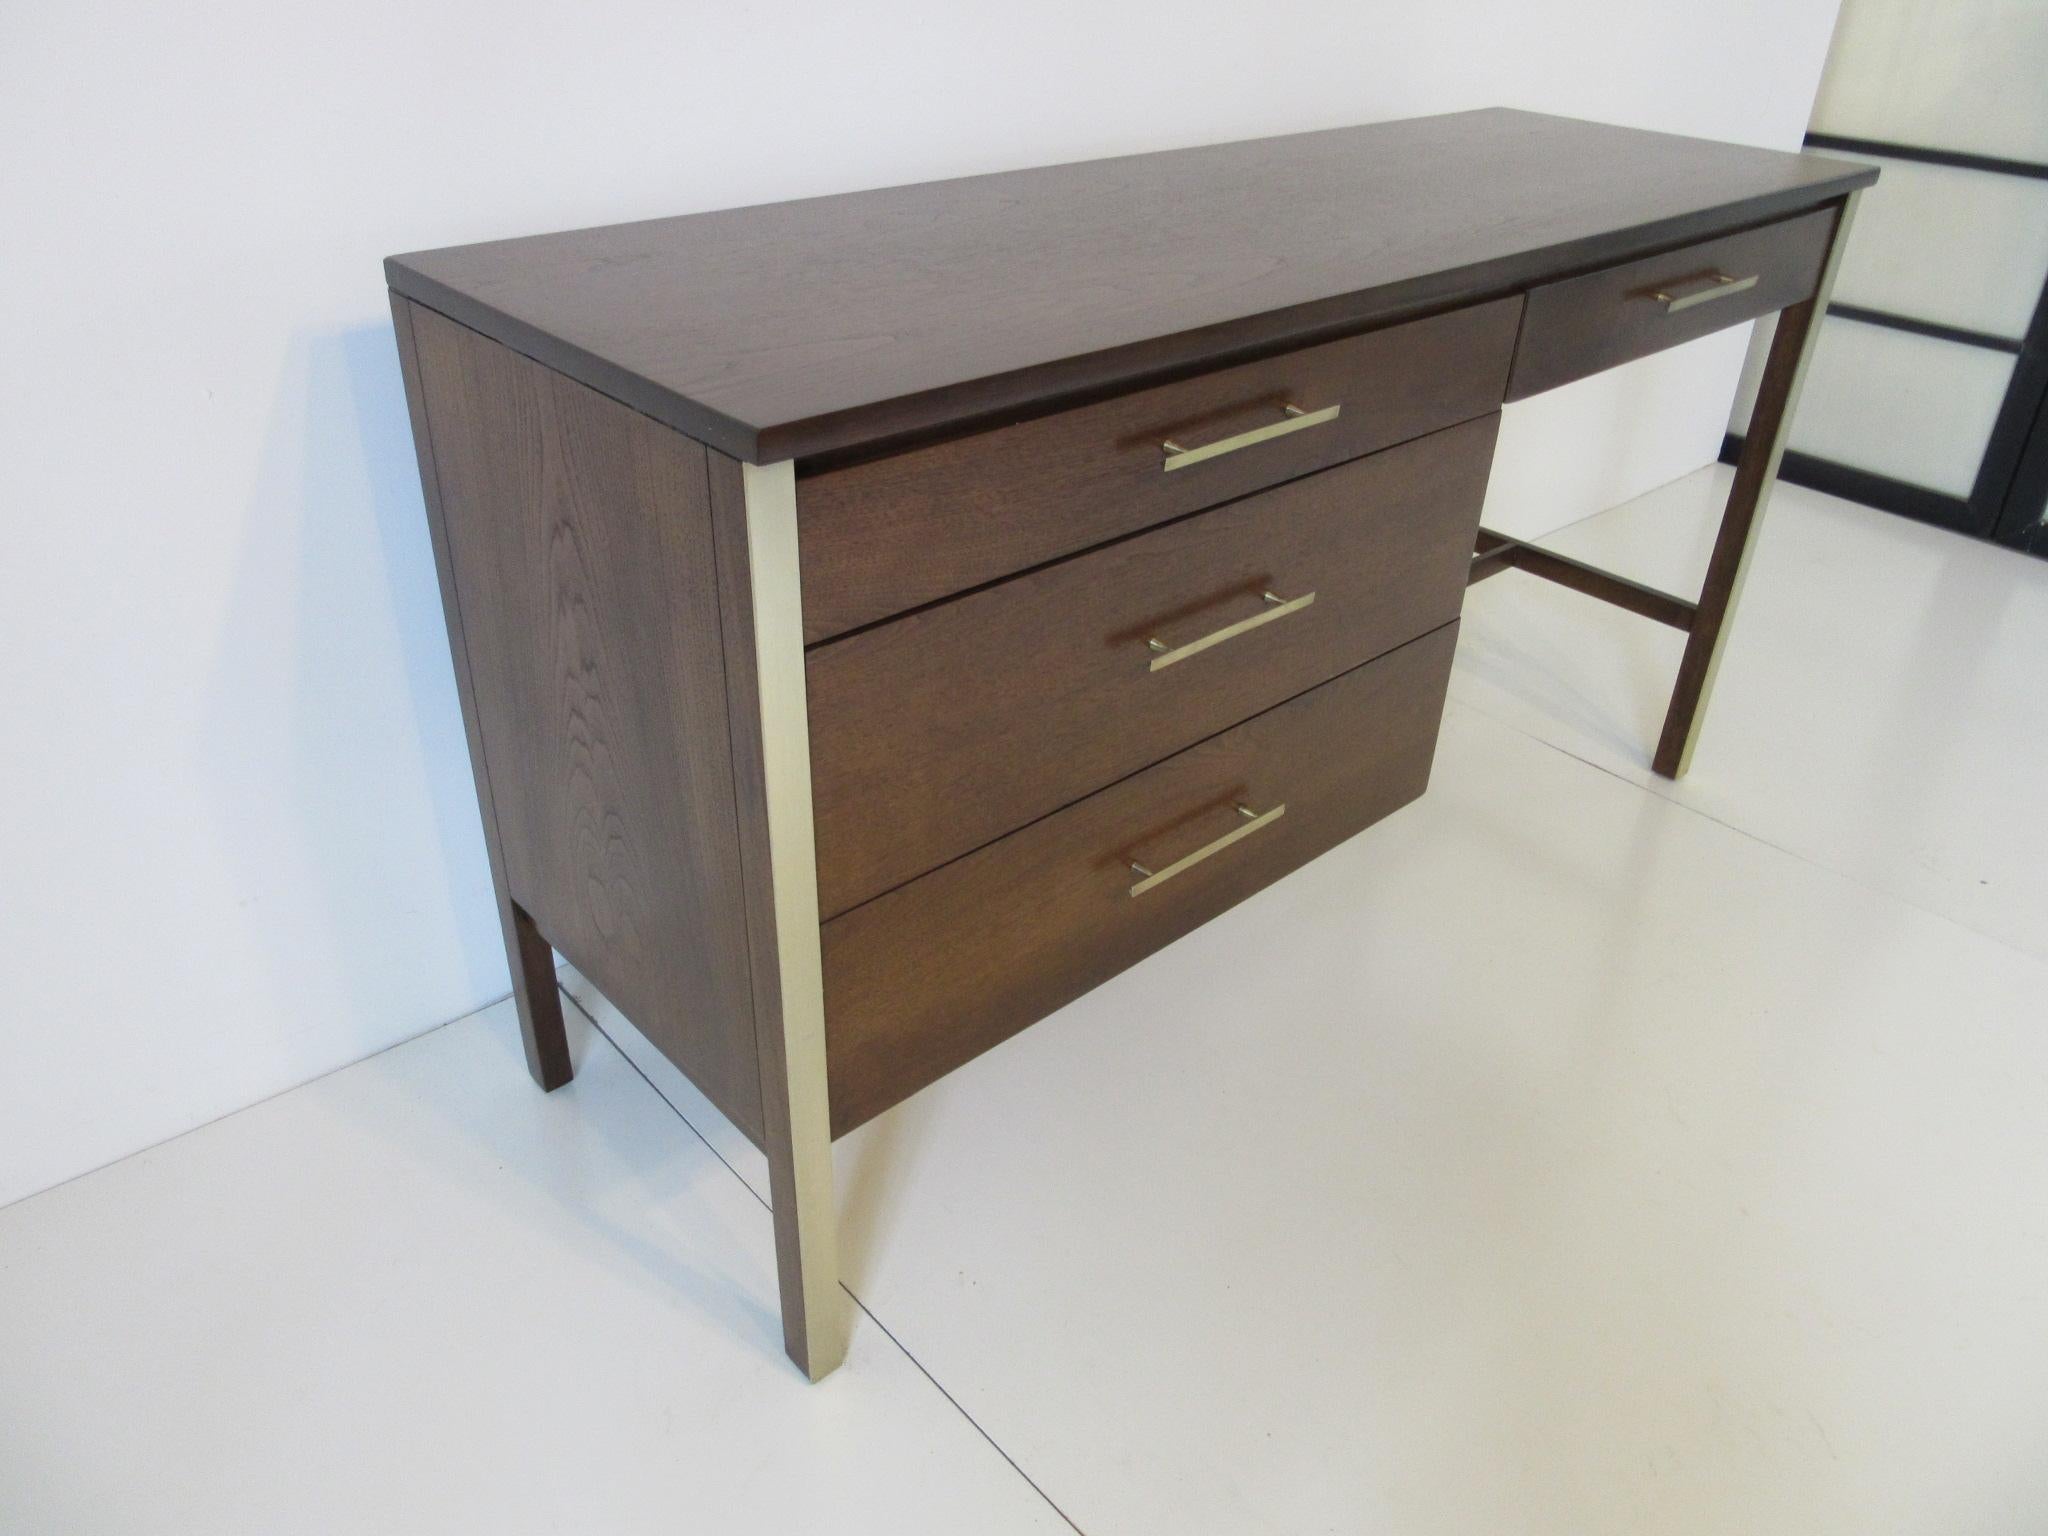 A dark walnut McCobb desk with four drawers and long brass pulls complemented with brass toned details to the front legs. A rare narrow styled desk which works well and takes up very little space.
  